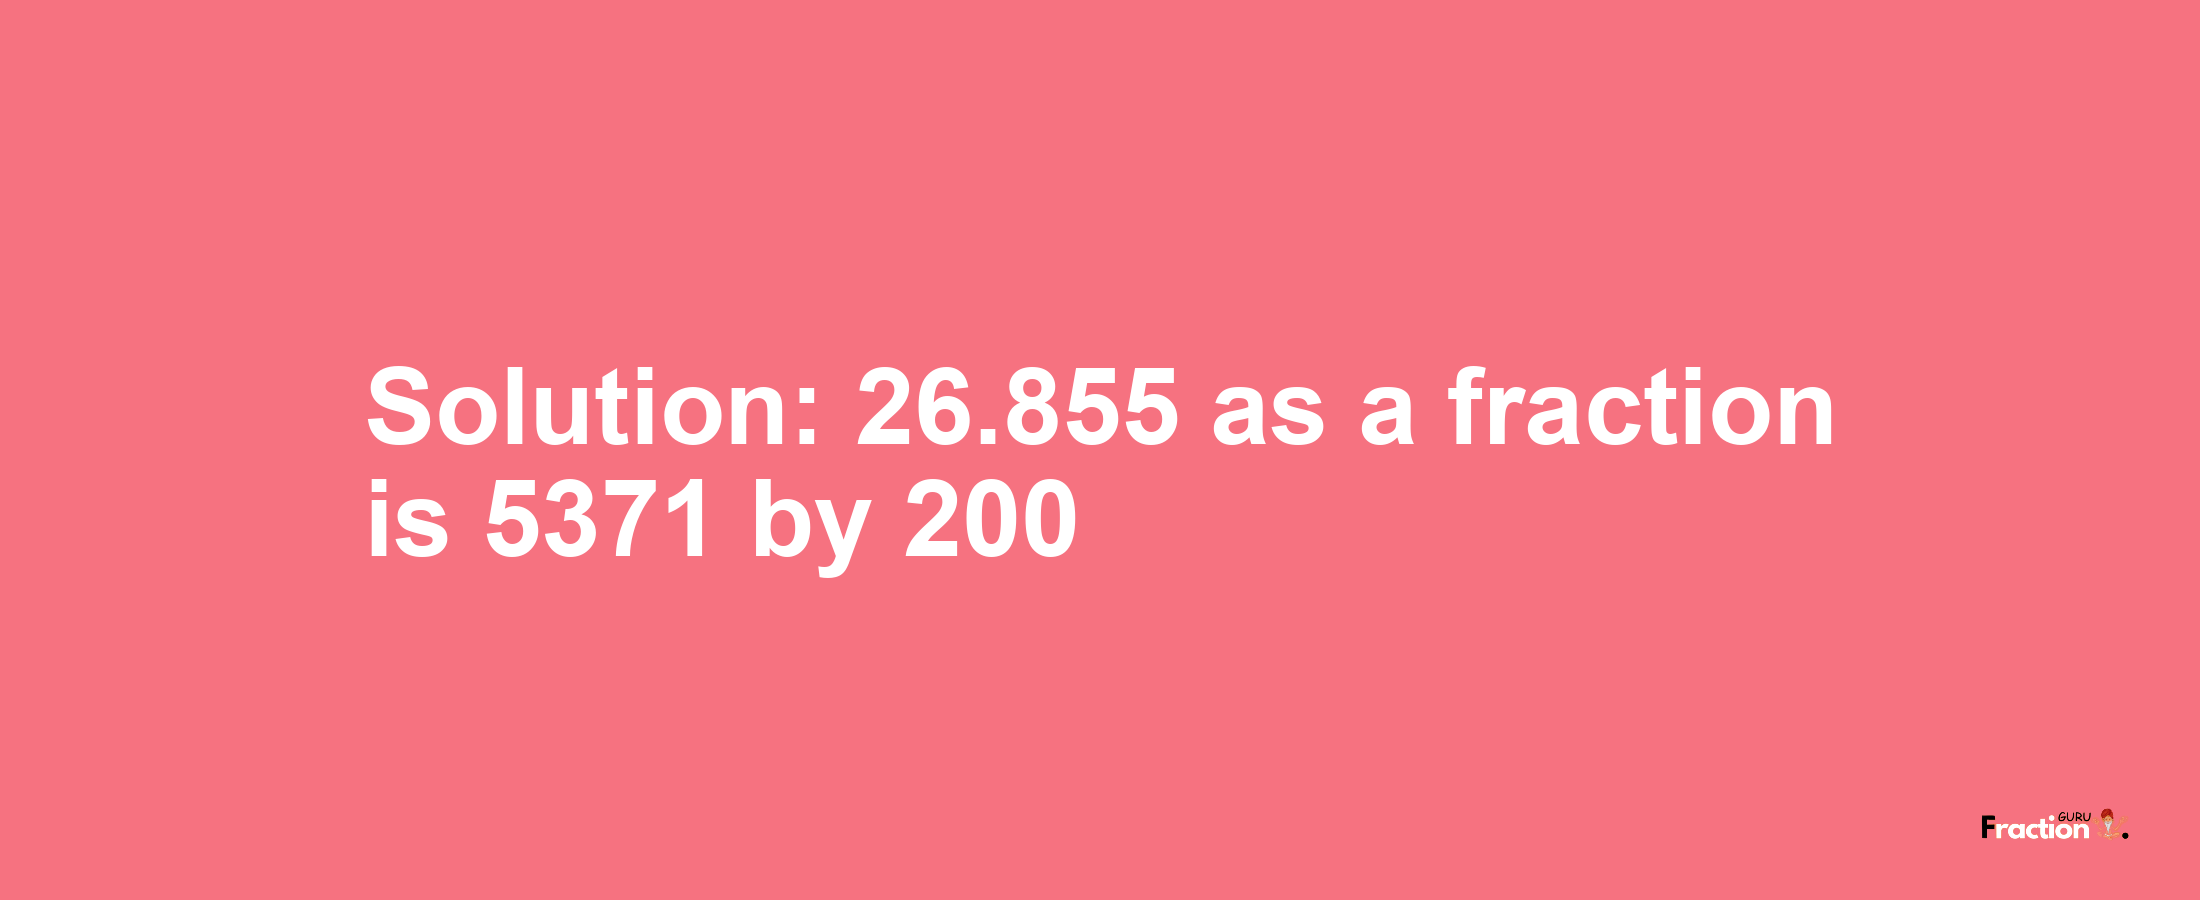 Solution:26.855 as a fraction is 5371/200